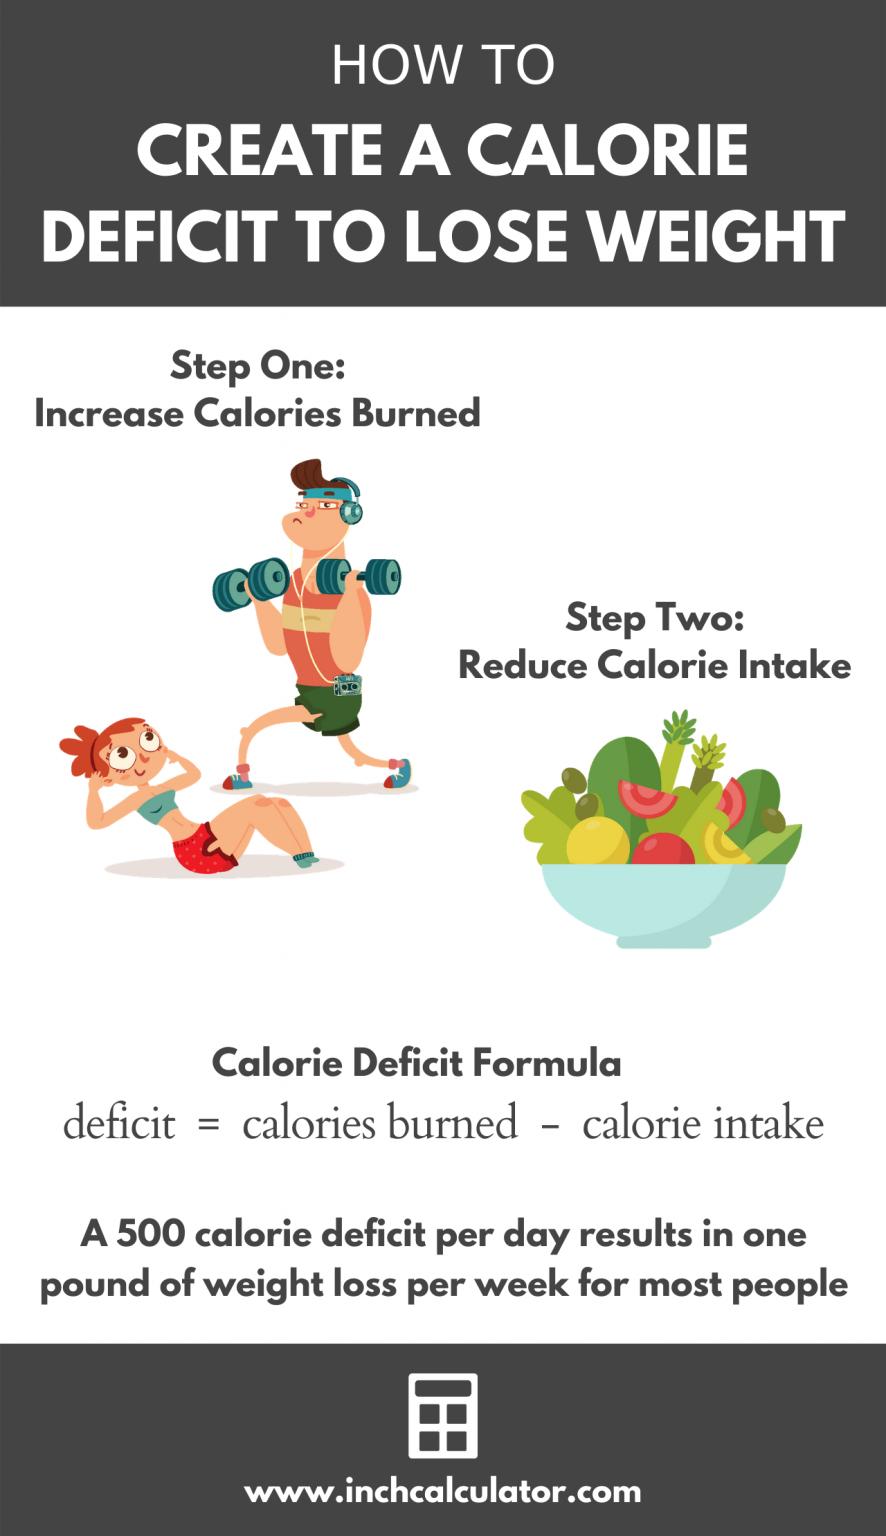 how does burning calories equate to weight loss